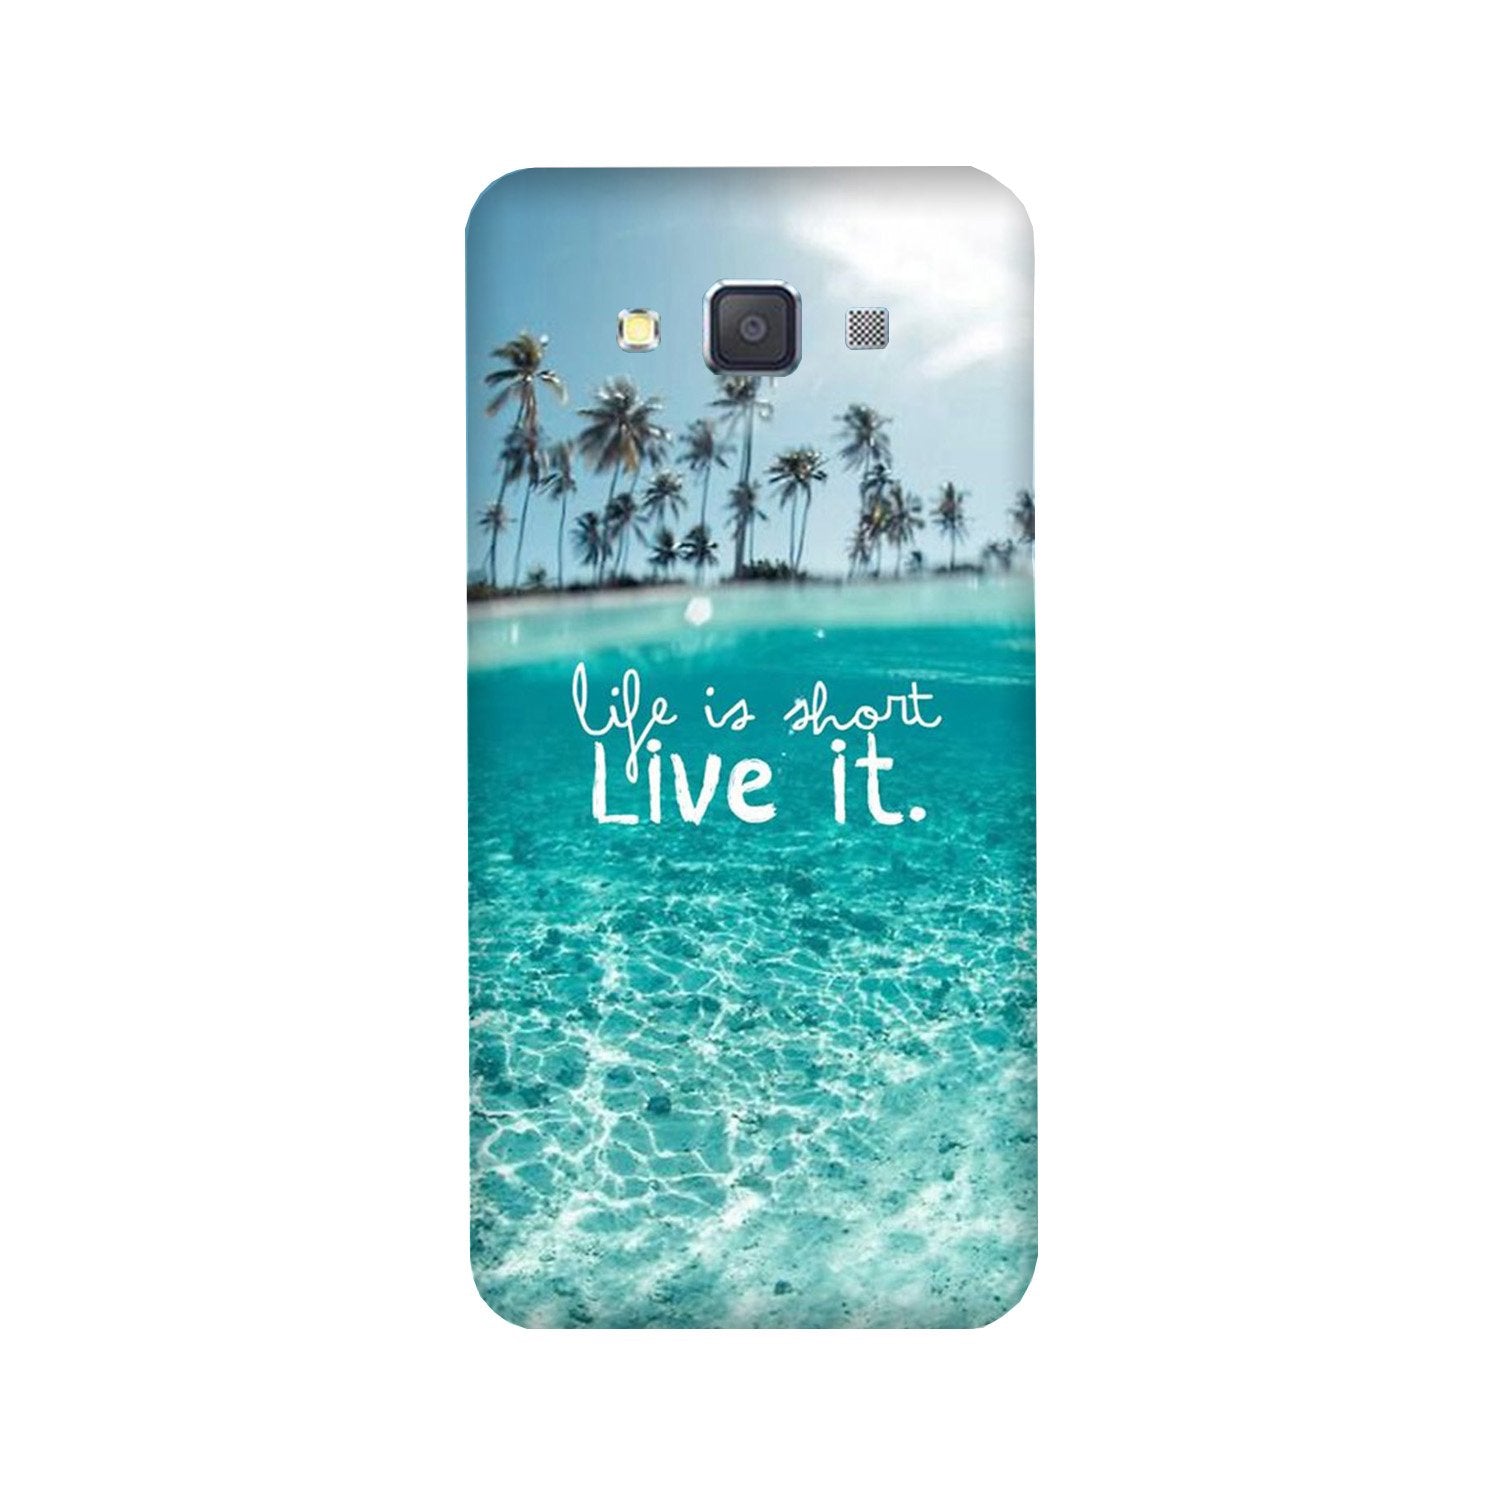 Life is short live it Case for Galaxy J5 (2016)